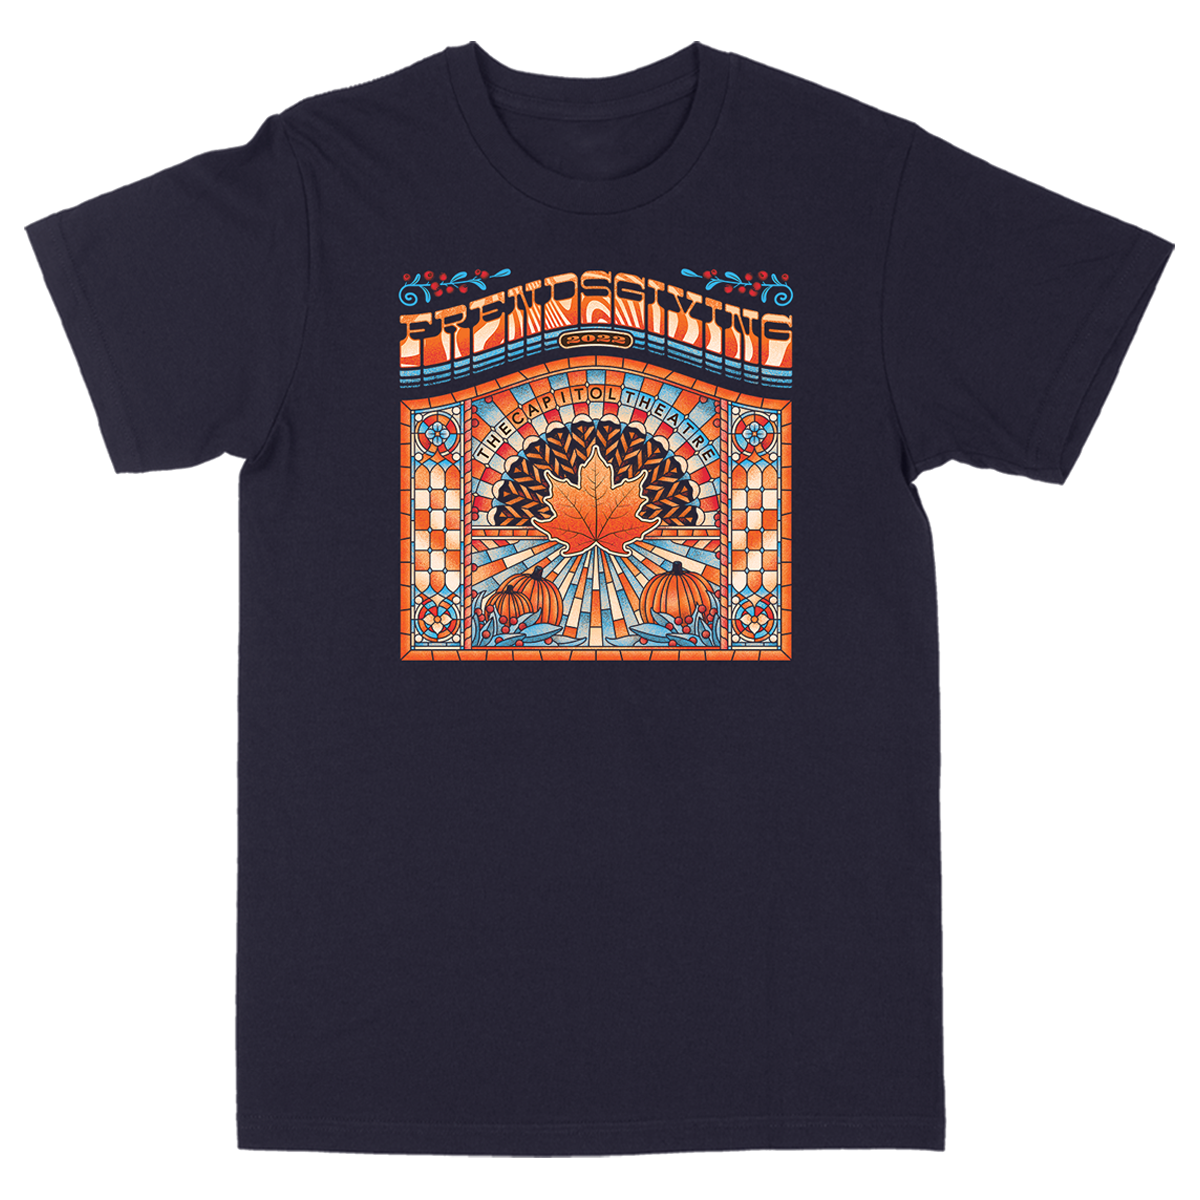 Official Frendsgiving Event Tee